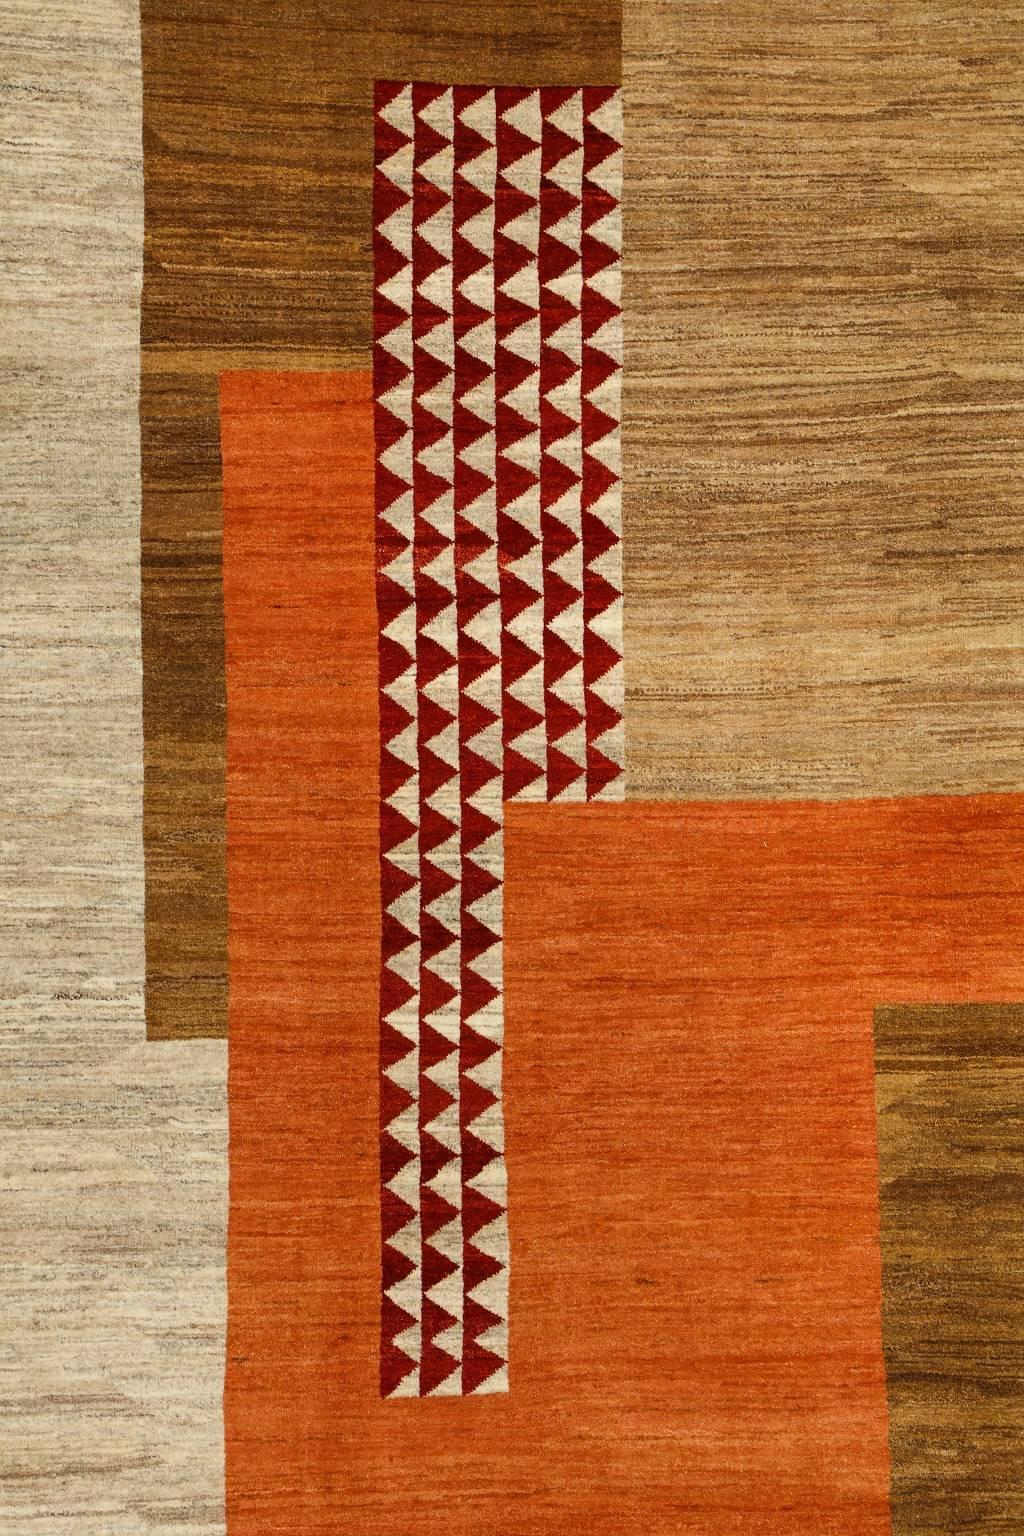 With vibrant orange tones throughout, this pure wool carpet inspired by Art Deco traditions utilizes the same handspun wool and organic vegetable dyes as all the pieces from the Orley Shabahang signature collection of contemporary carpets. This